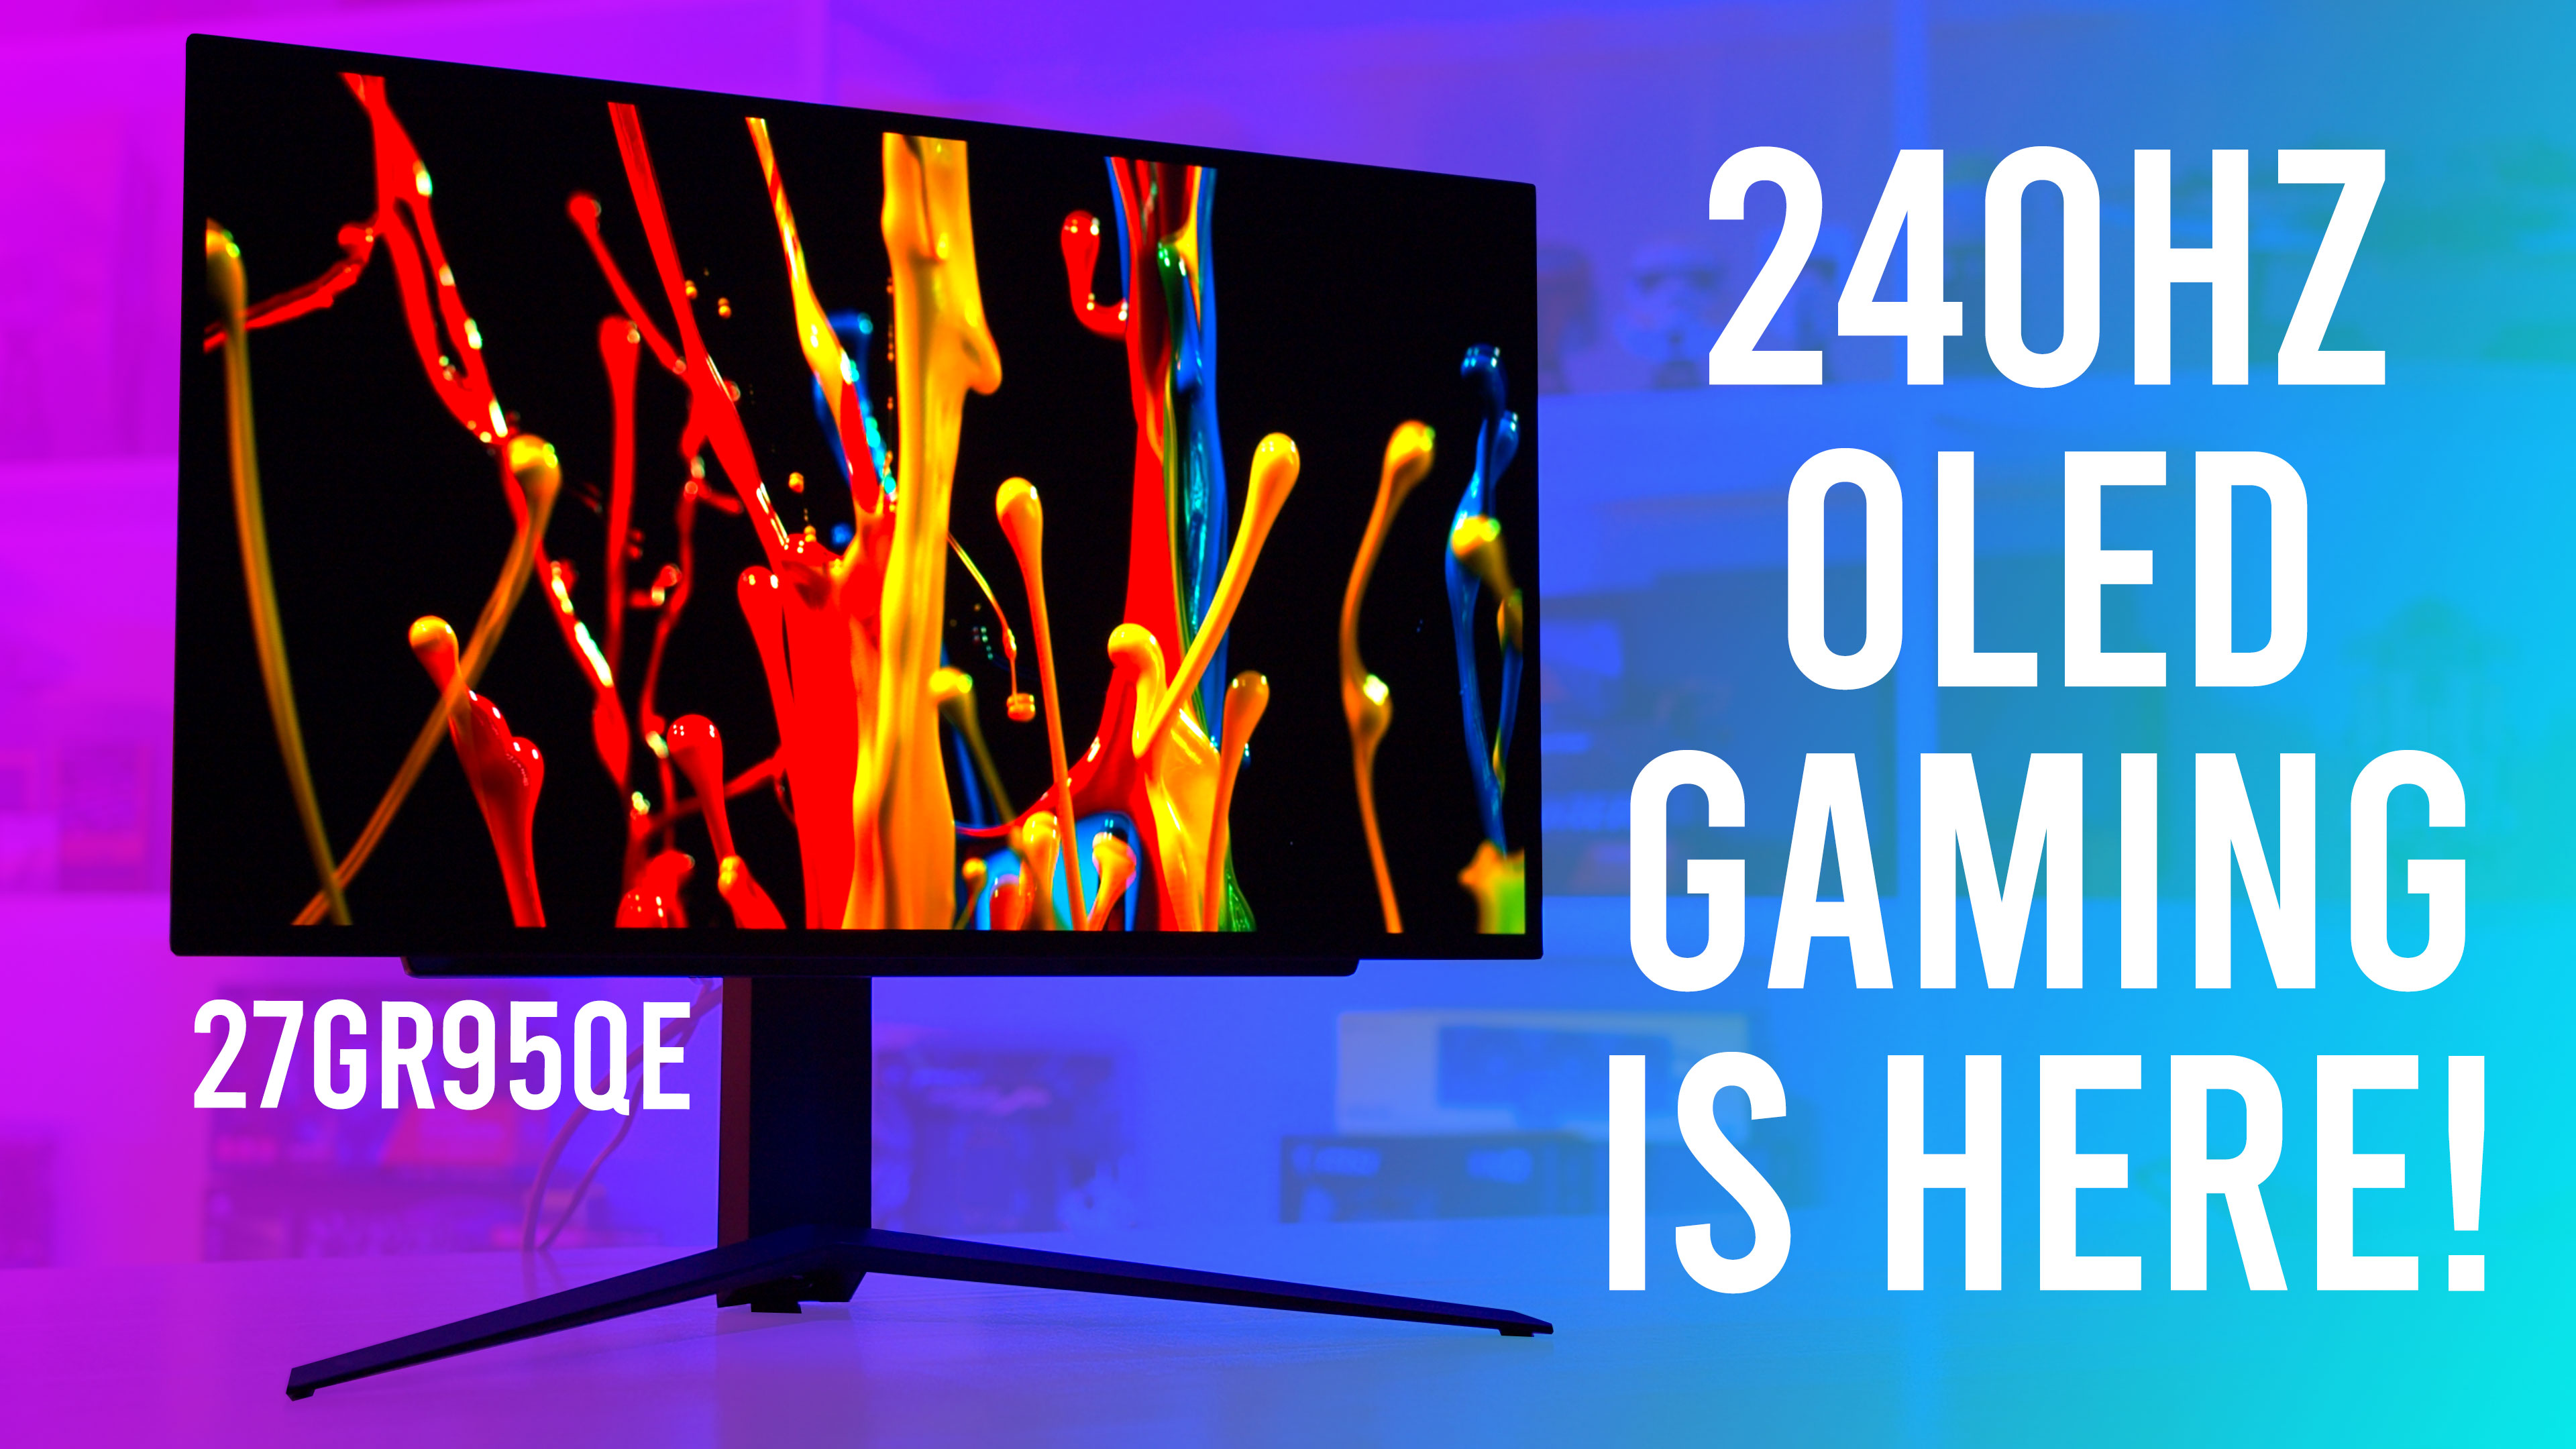 Hardware Unboxed on X: Today we're reviewing the 1440p 240Hz OLED